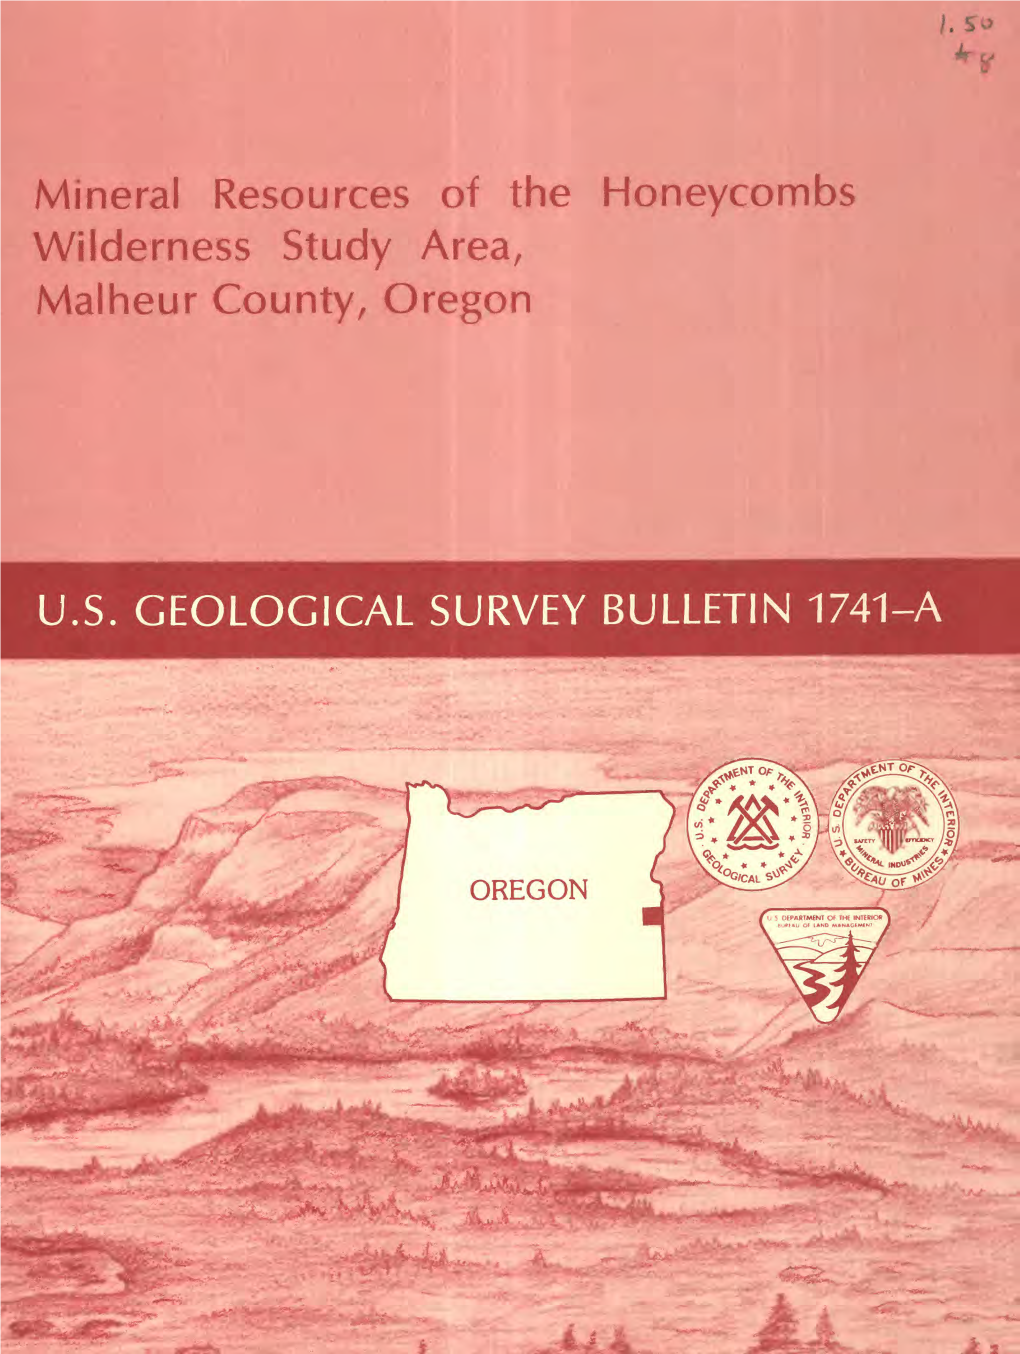 Mineral Resources of the Honeycombs Wilderness Study Area, Malheur County, Oregon